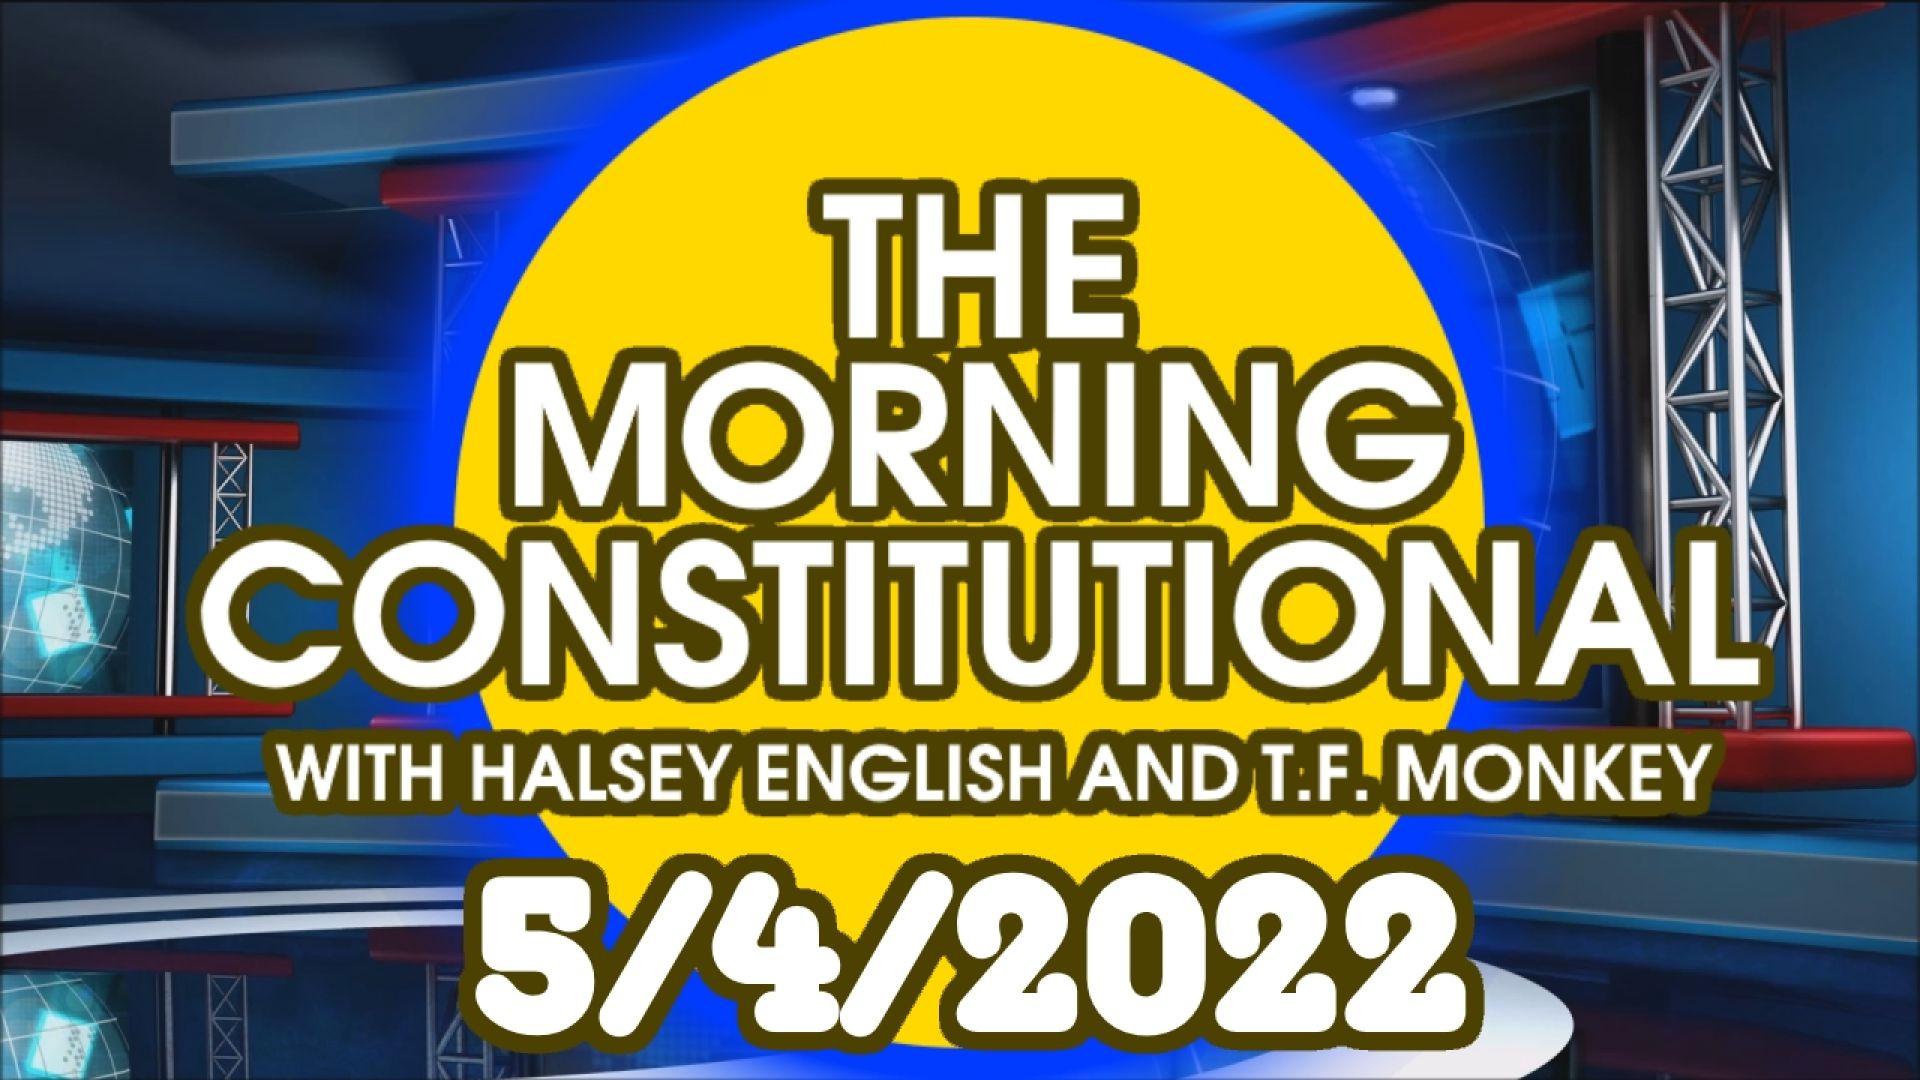 The Morning Constitutional: 5/4/2022